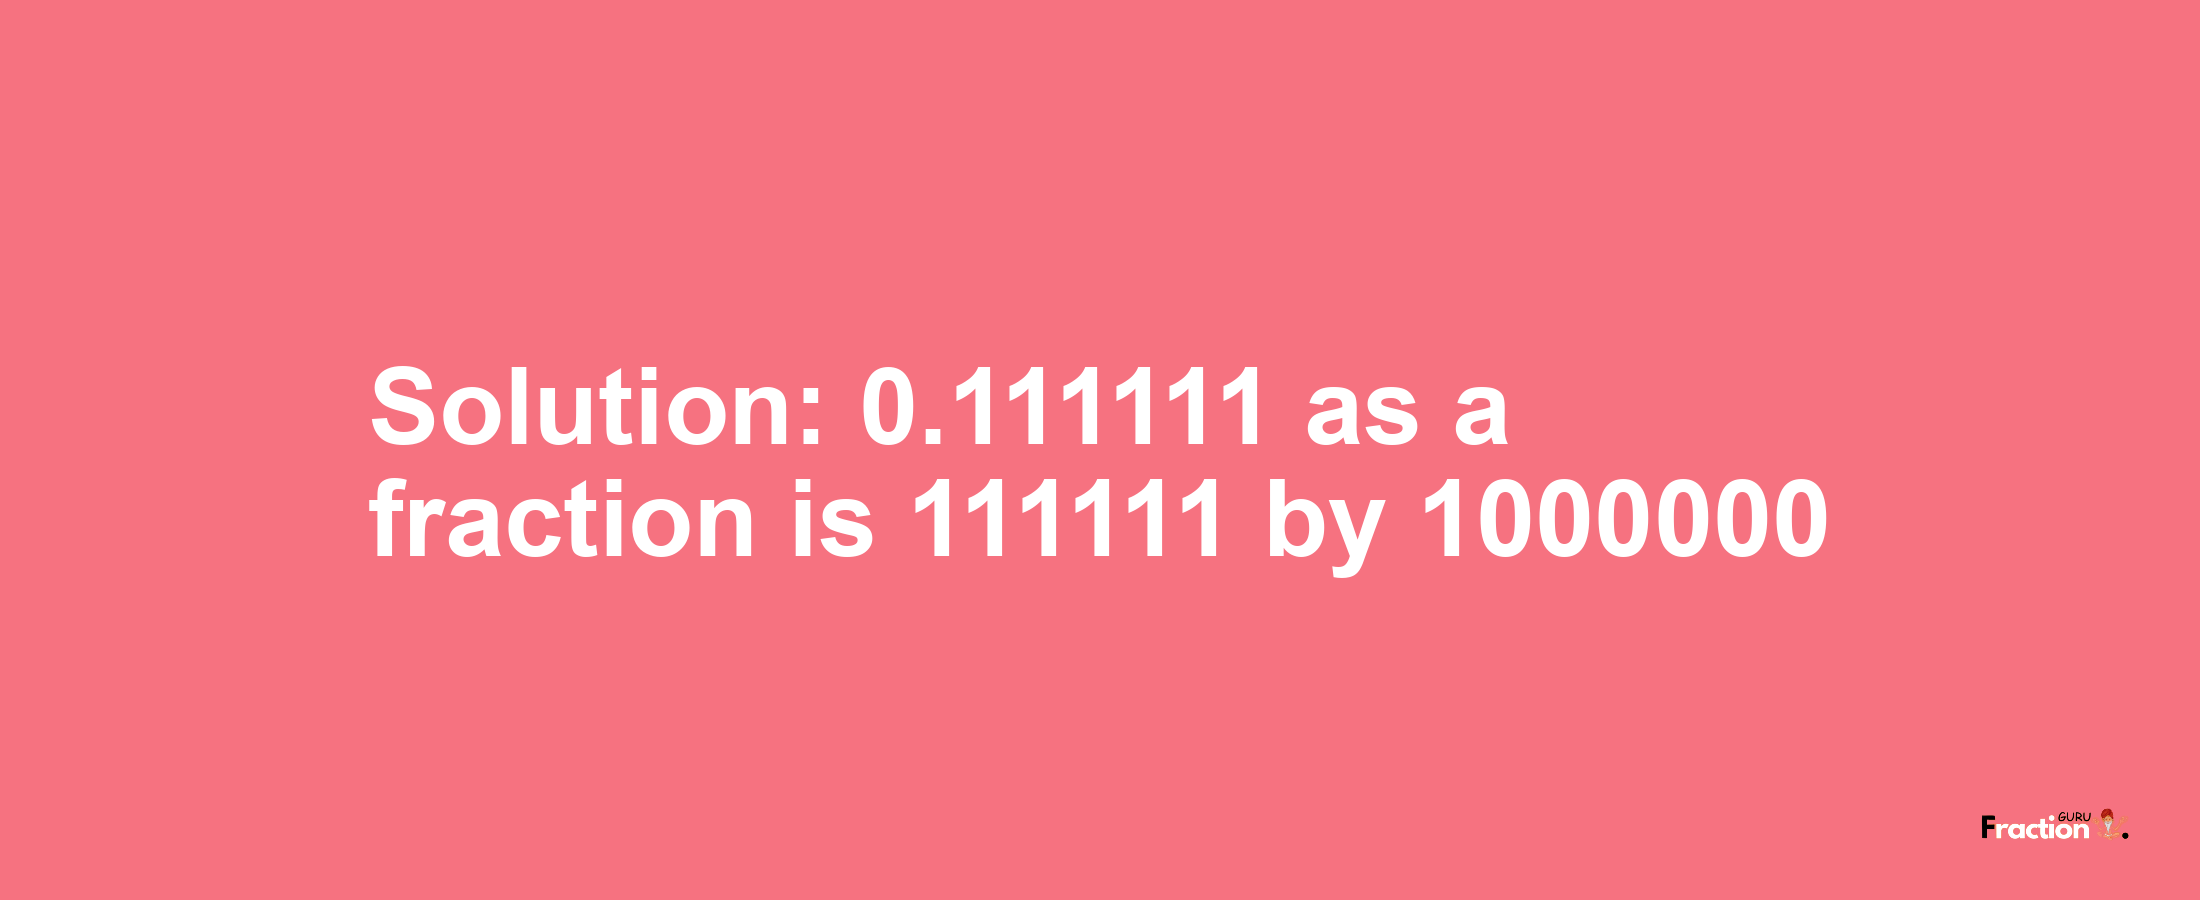 Solution:0.111111 as a fraction is 111111/1000000